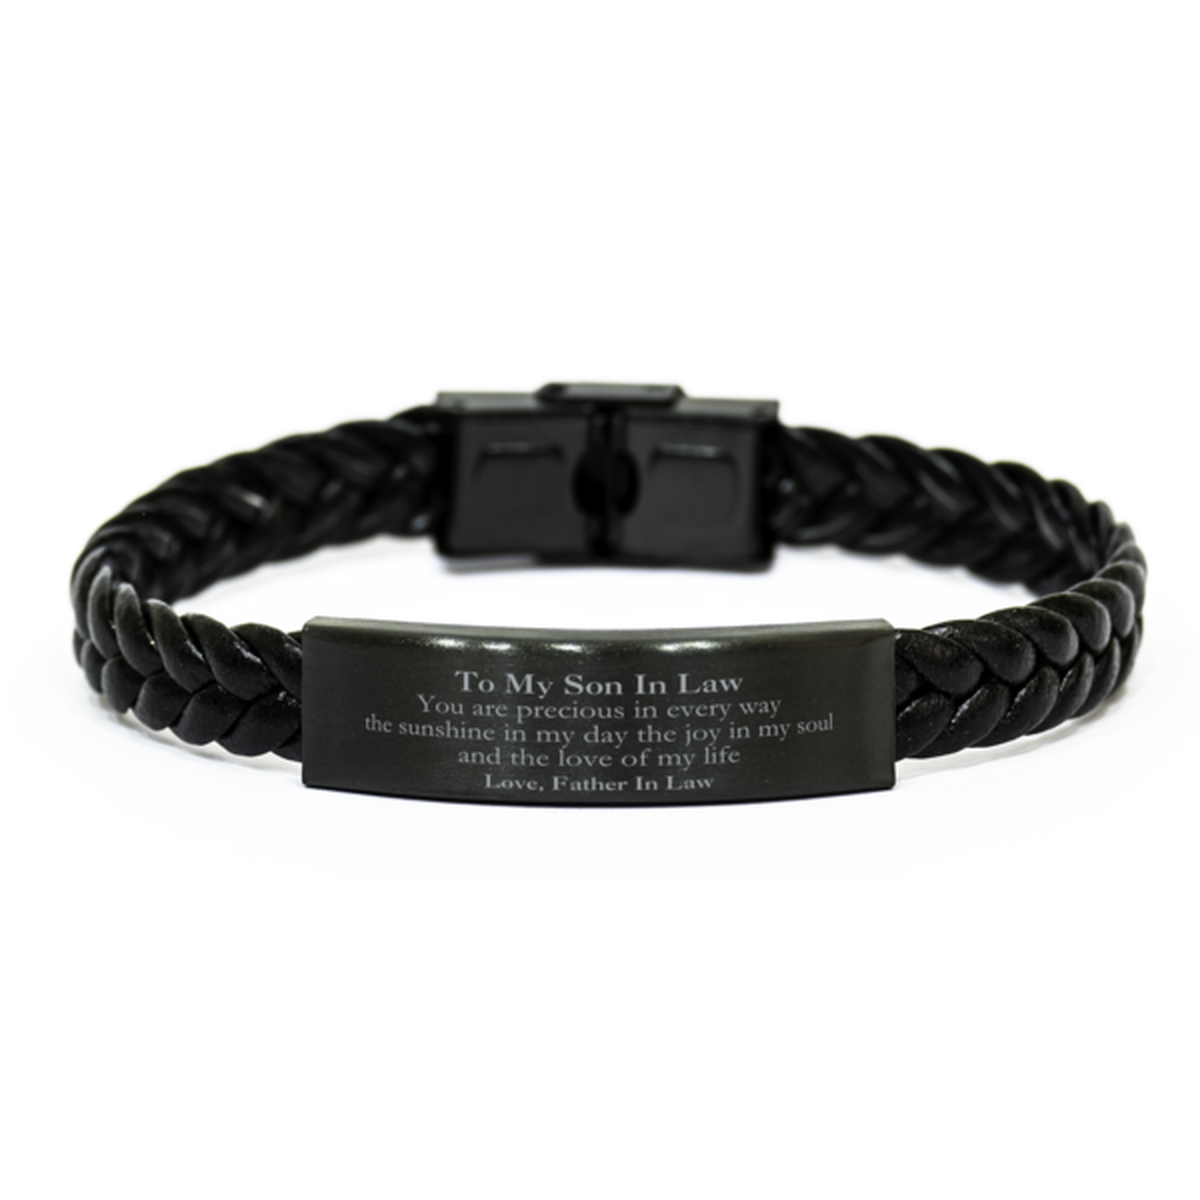 Graduation Gifts for Son In Law Braided Leather Bracelet Present from Father In Law, Christmas Son In Law Birthday Gifts Son In Law You are precious in every way the sunshine in my day. Love, Father In Law